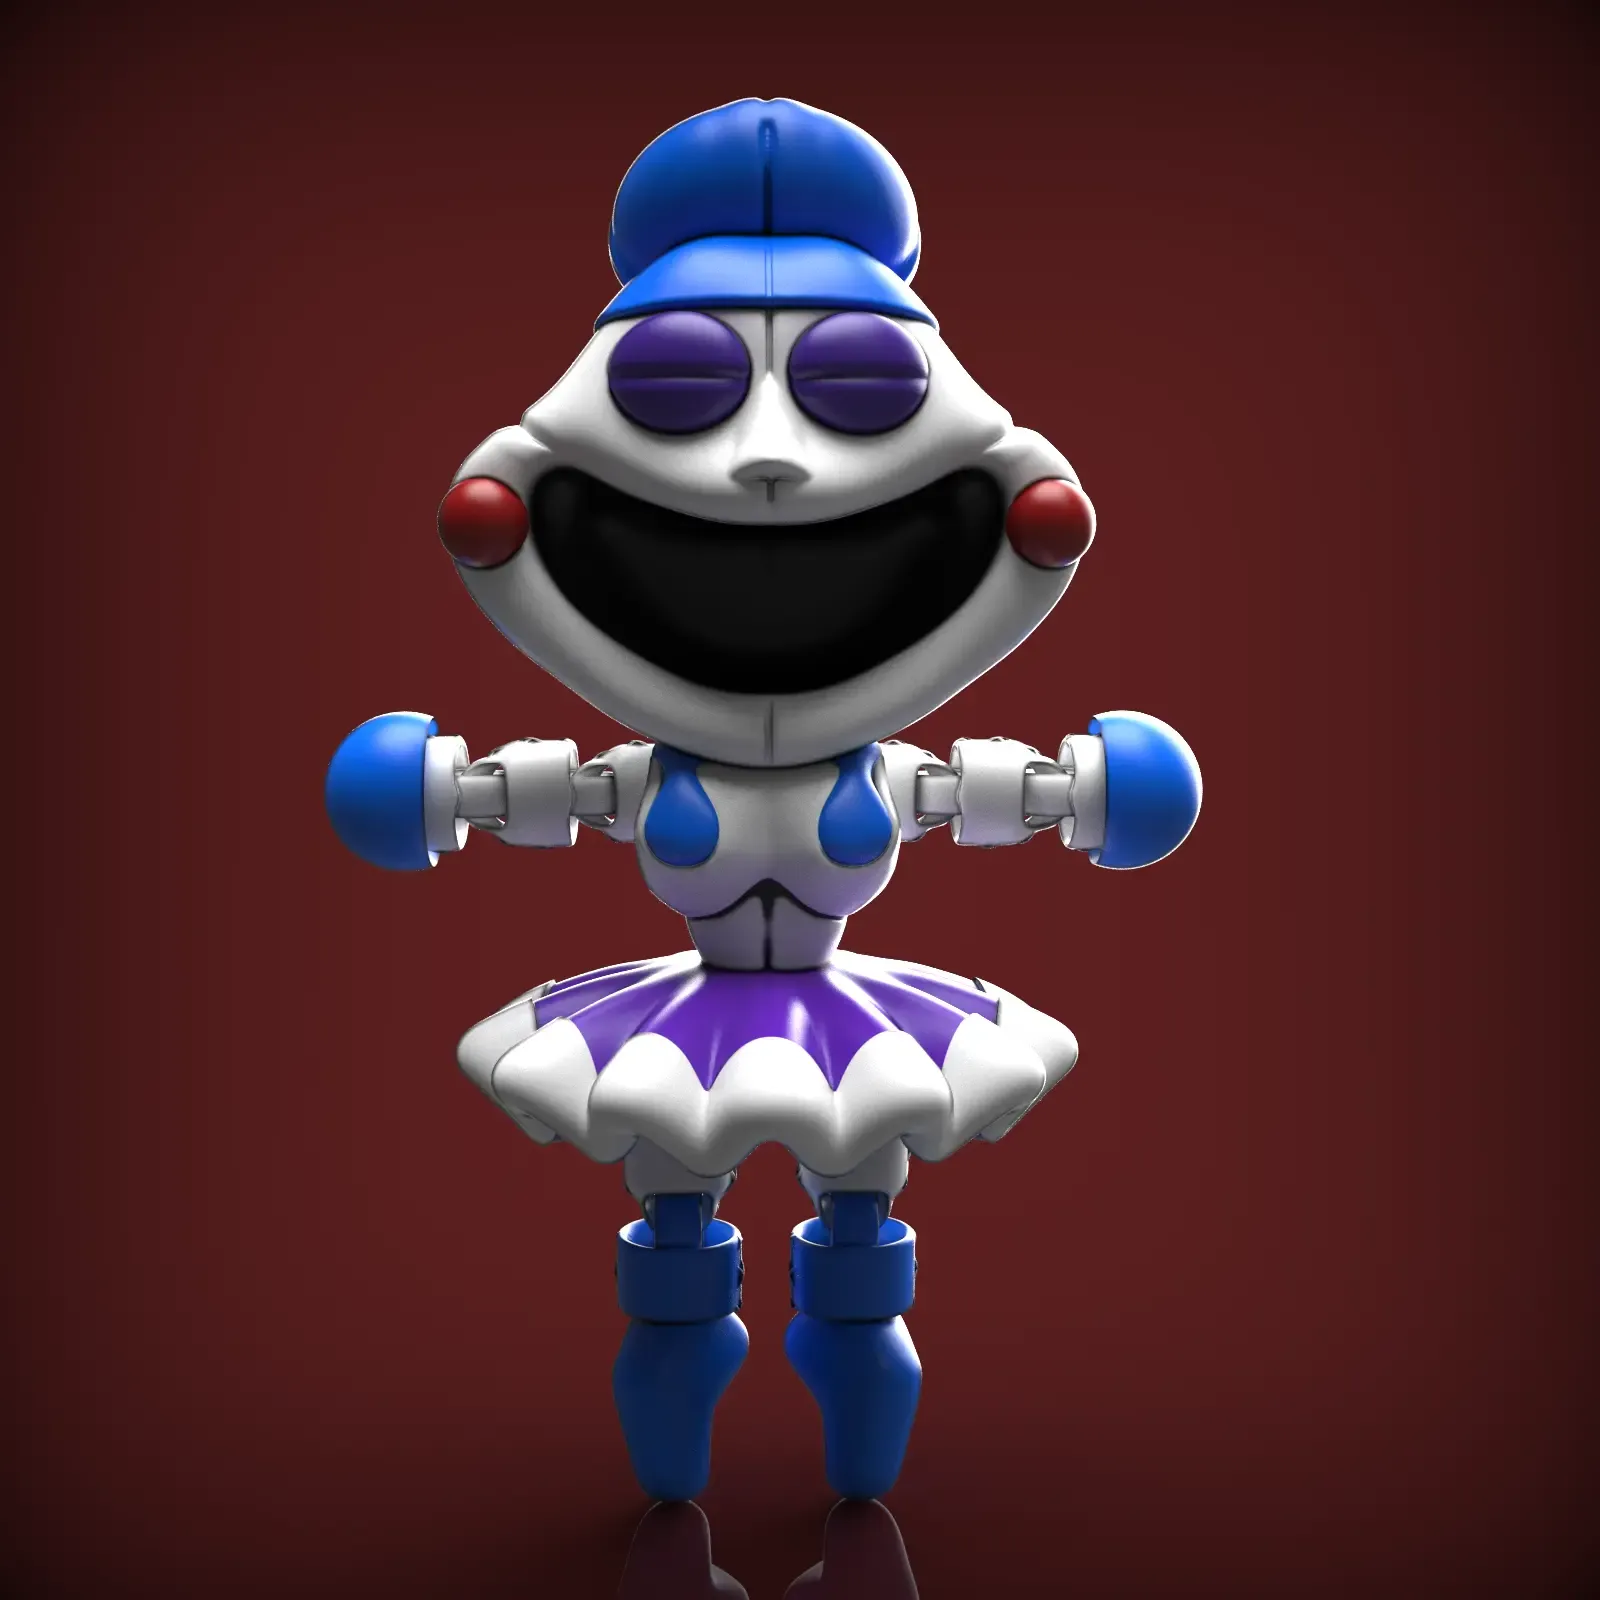 BALLORA SMILING // PRINT-IN-PLACE WITHOUT SUPPORT